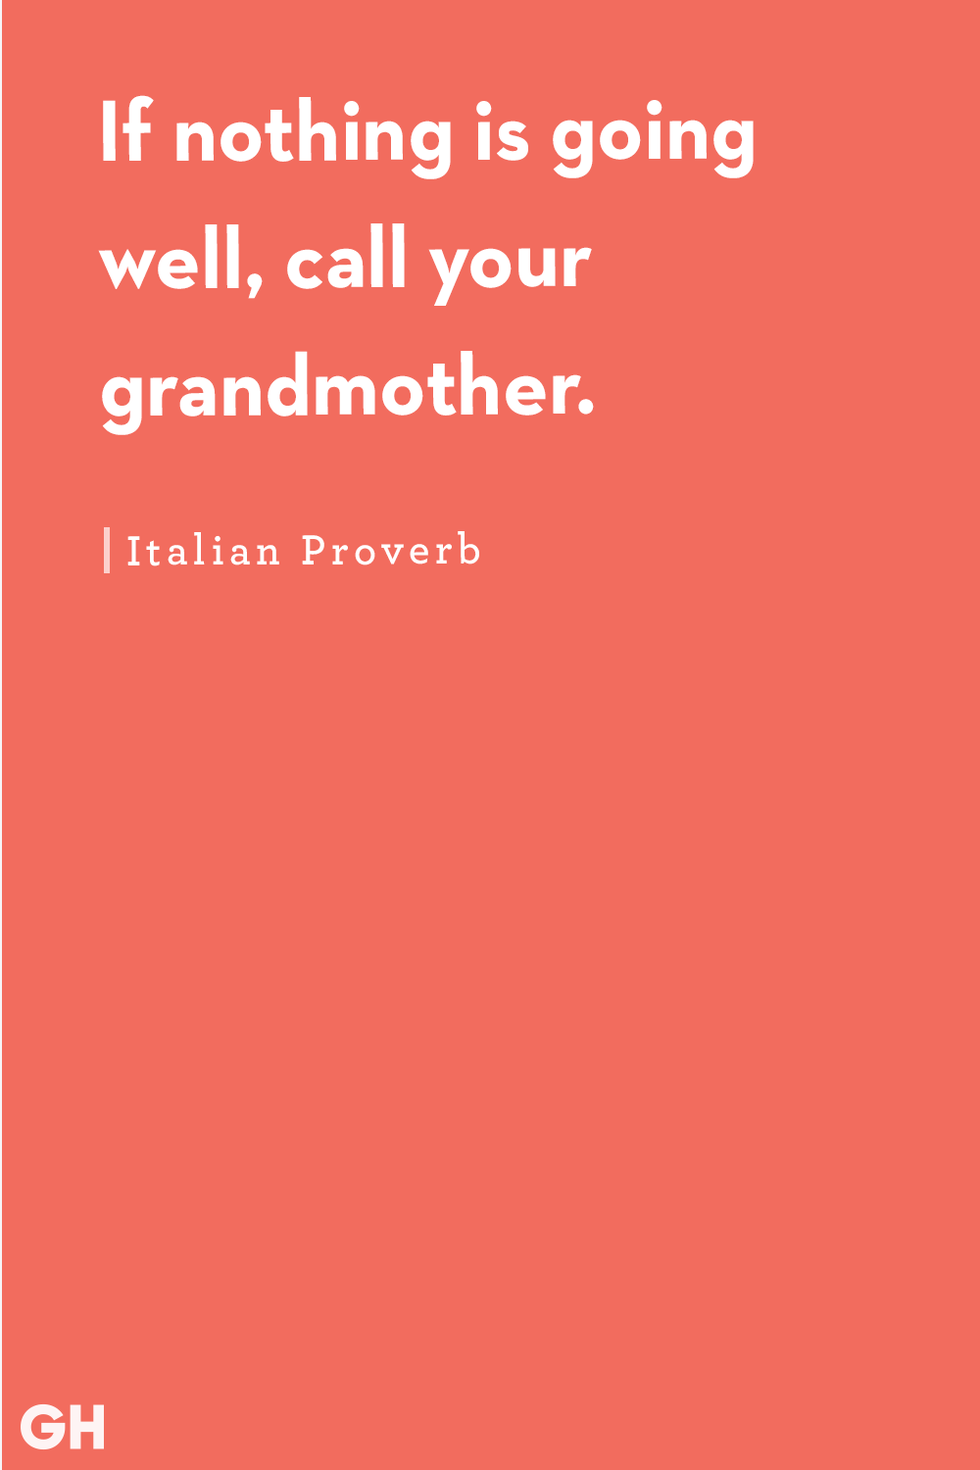 35 Best Grandma Quotes - Fun and Loving Quotes About Grandmothers